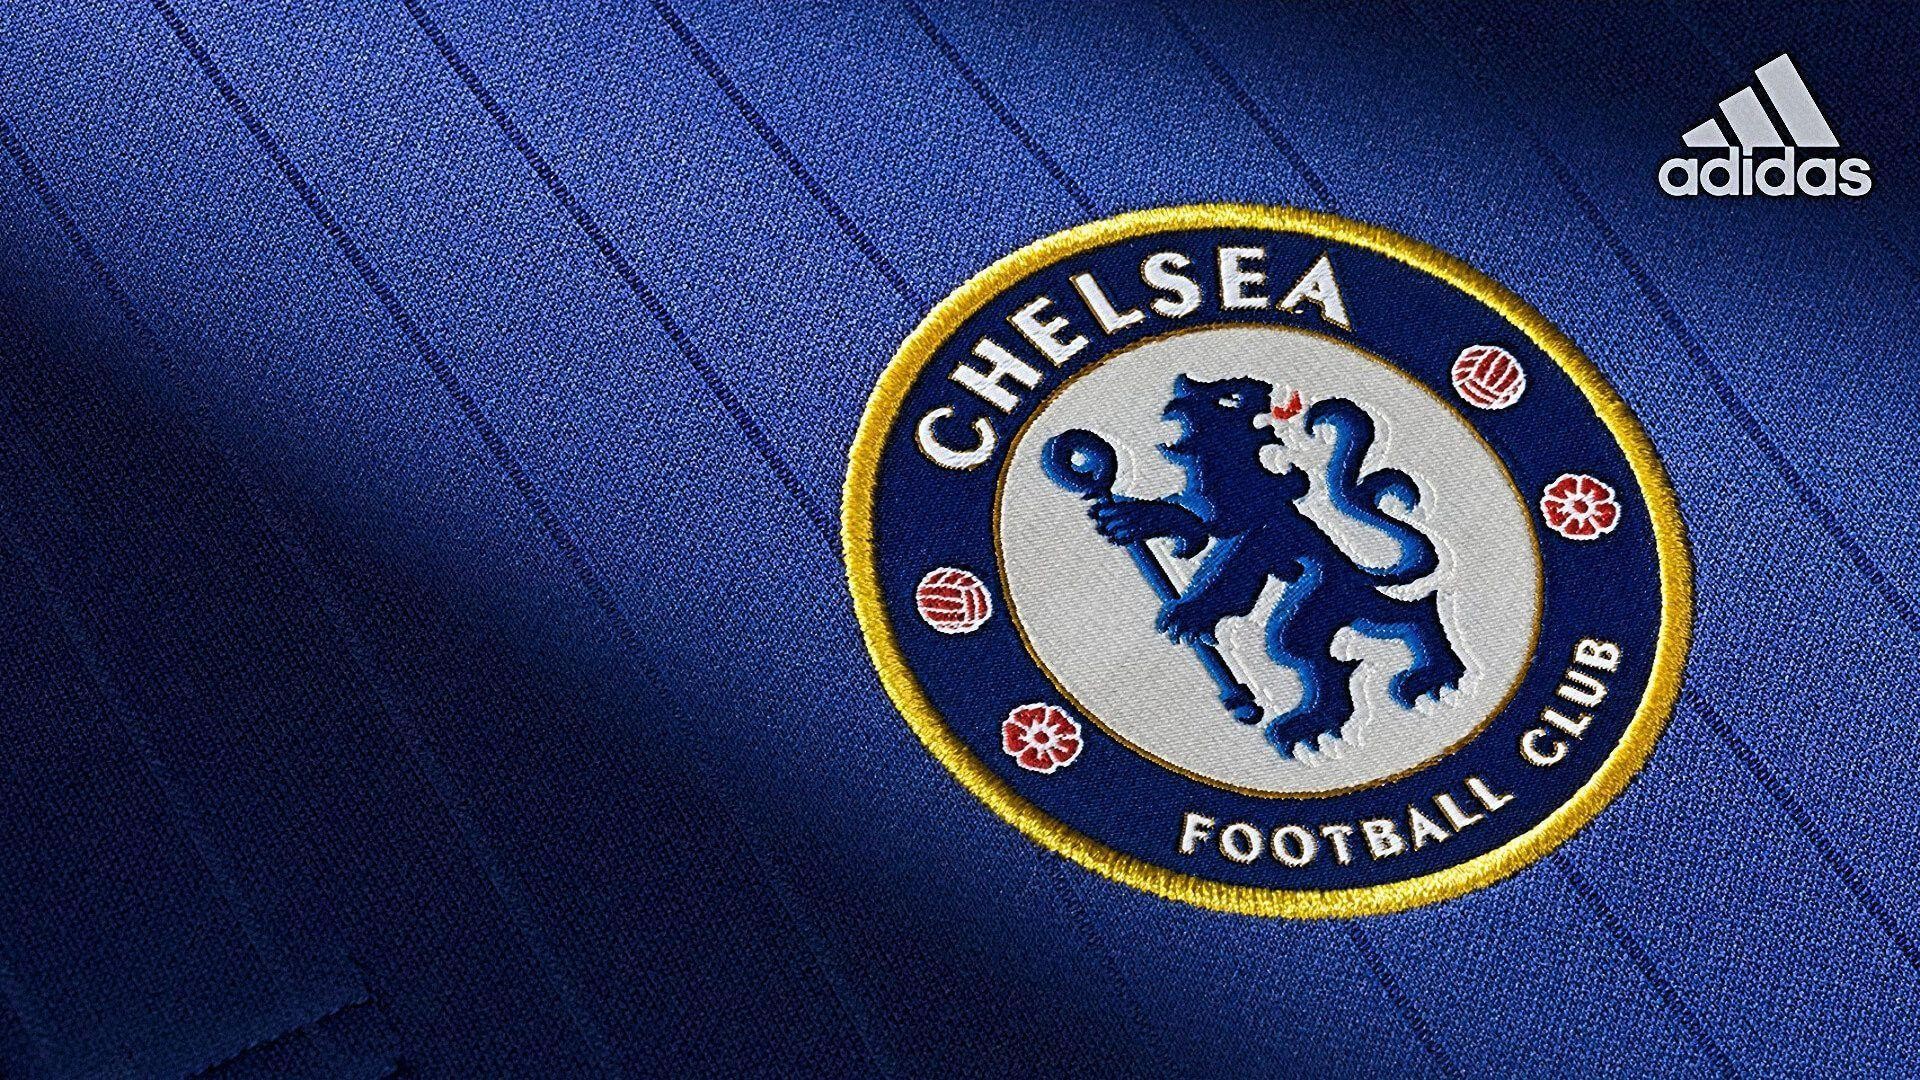 HD Chelsea Champions League Wallpapers with high-resolution 1920x1080 pixel. You can use this wallpaper for your Desktop Computers, Mac Screensavers, Windows Backgrounds, iPhone Wallpapers, Tablet or Android Lock screen and another Mobile device